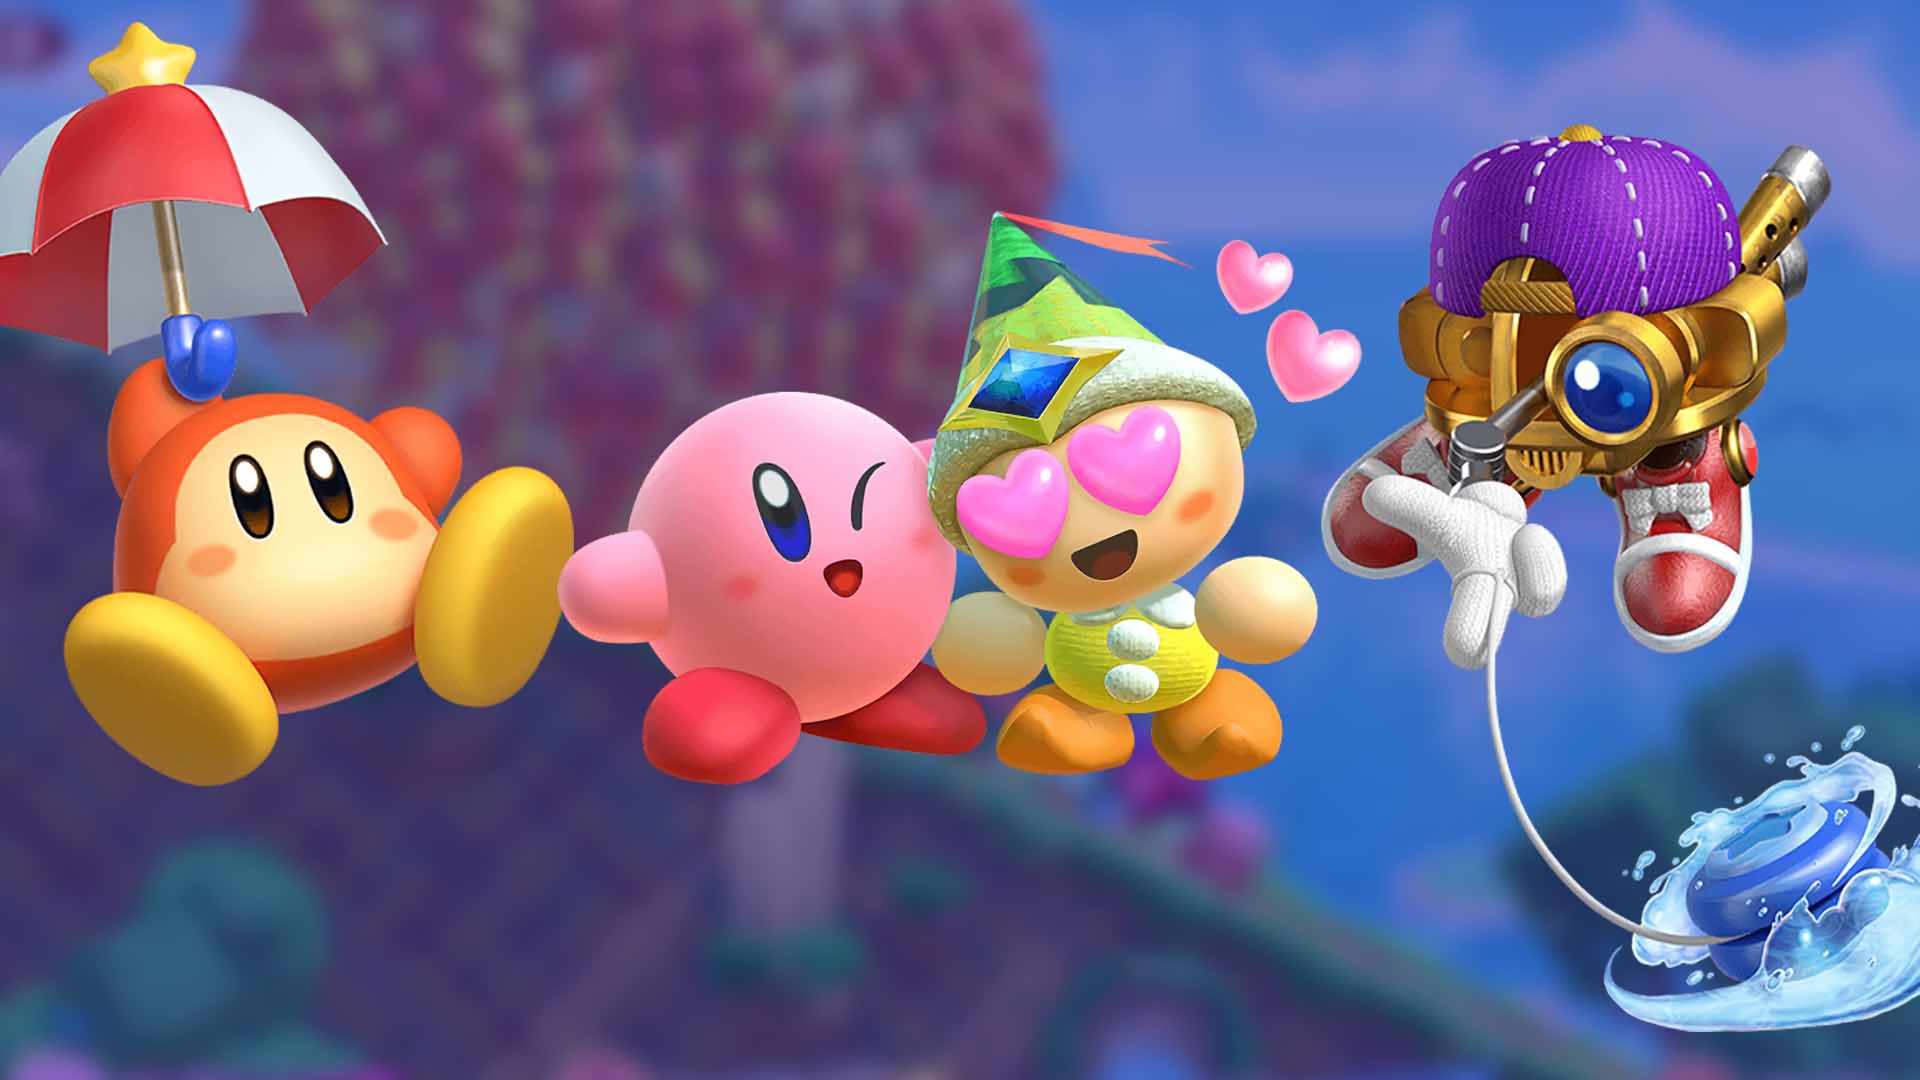 1080p Kirby: Star Allies Hd Images